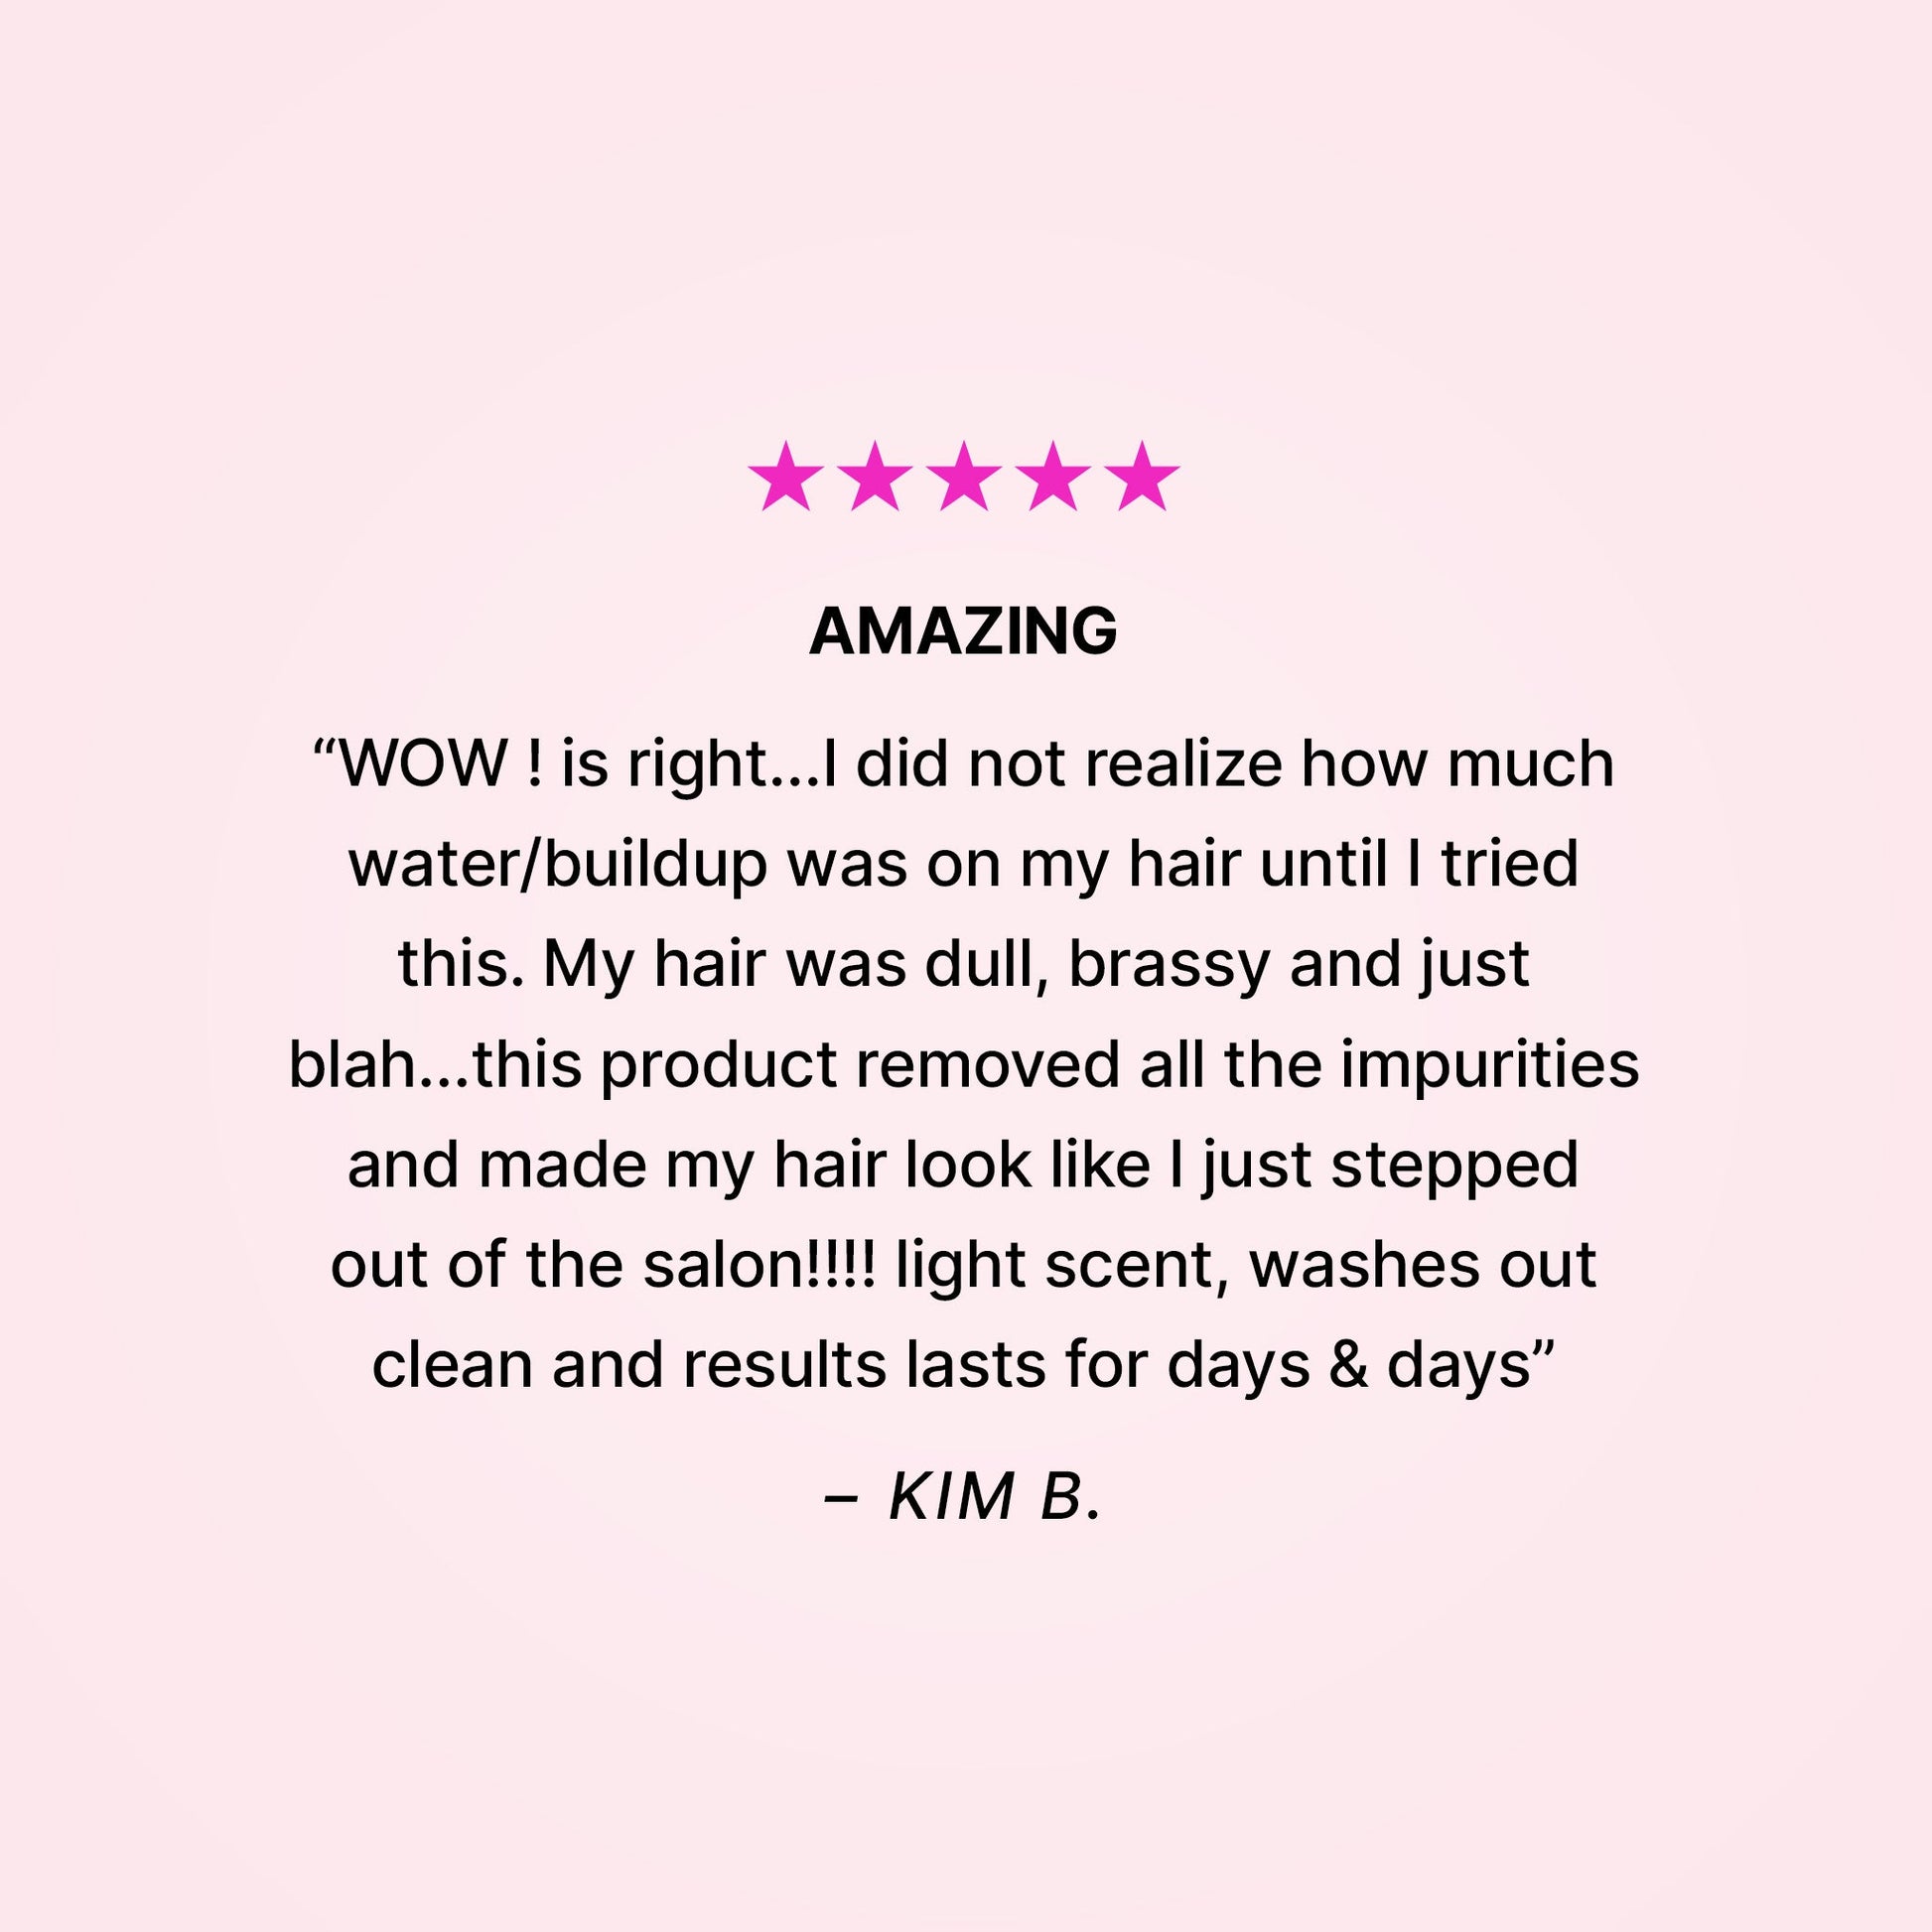 Five stars. Amazing. “WOW! is right… I did not realize how much water/buildup was on my hair until I tried this. My hair was dull, brassy and just blah… this product removed all the impurities and made my hair look like I just stepped out of the salon!!! Light scent, washes out clean and results last for days & days” - Kim B. 